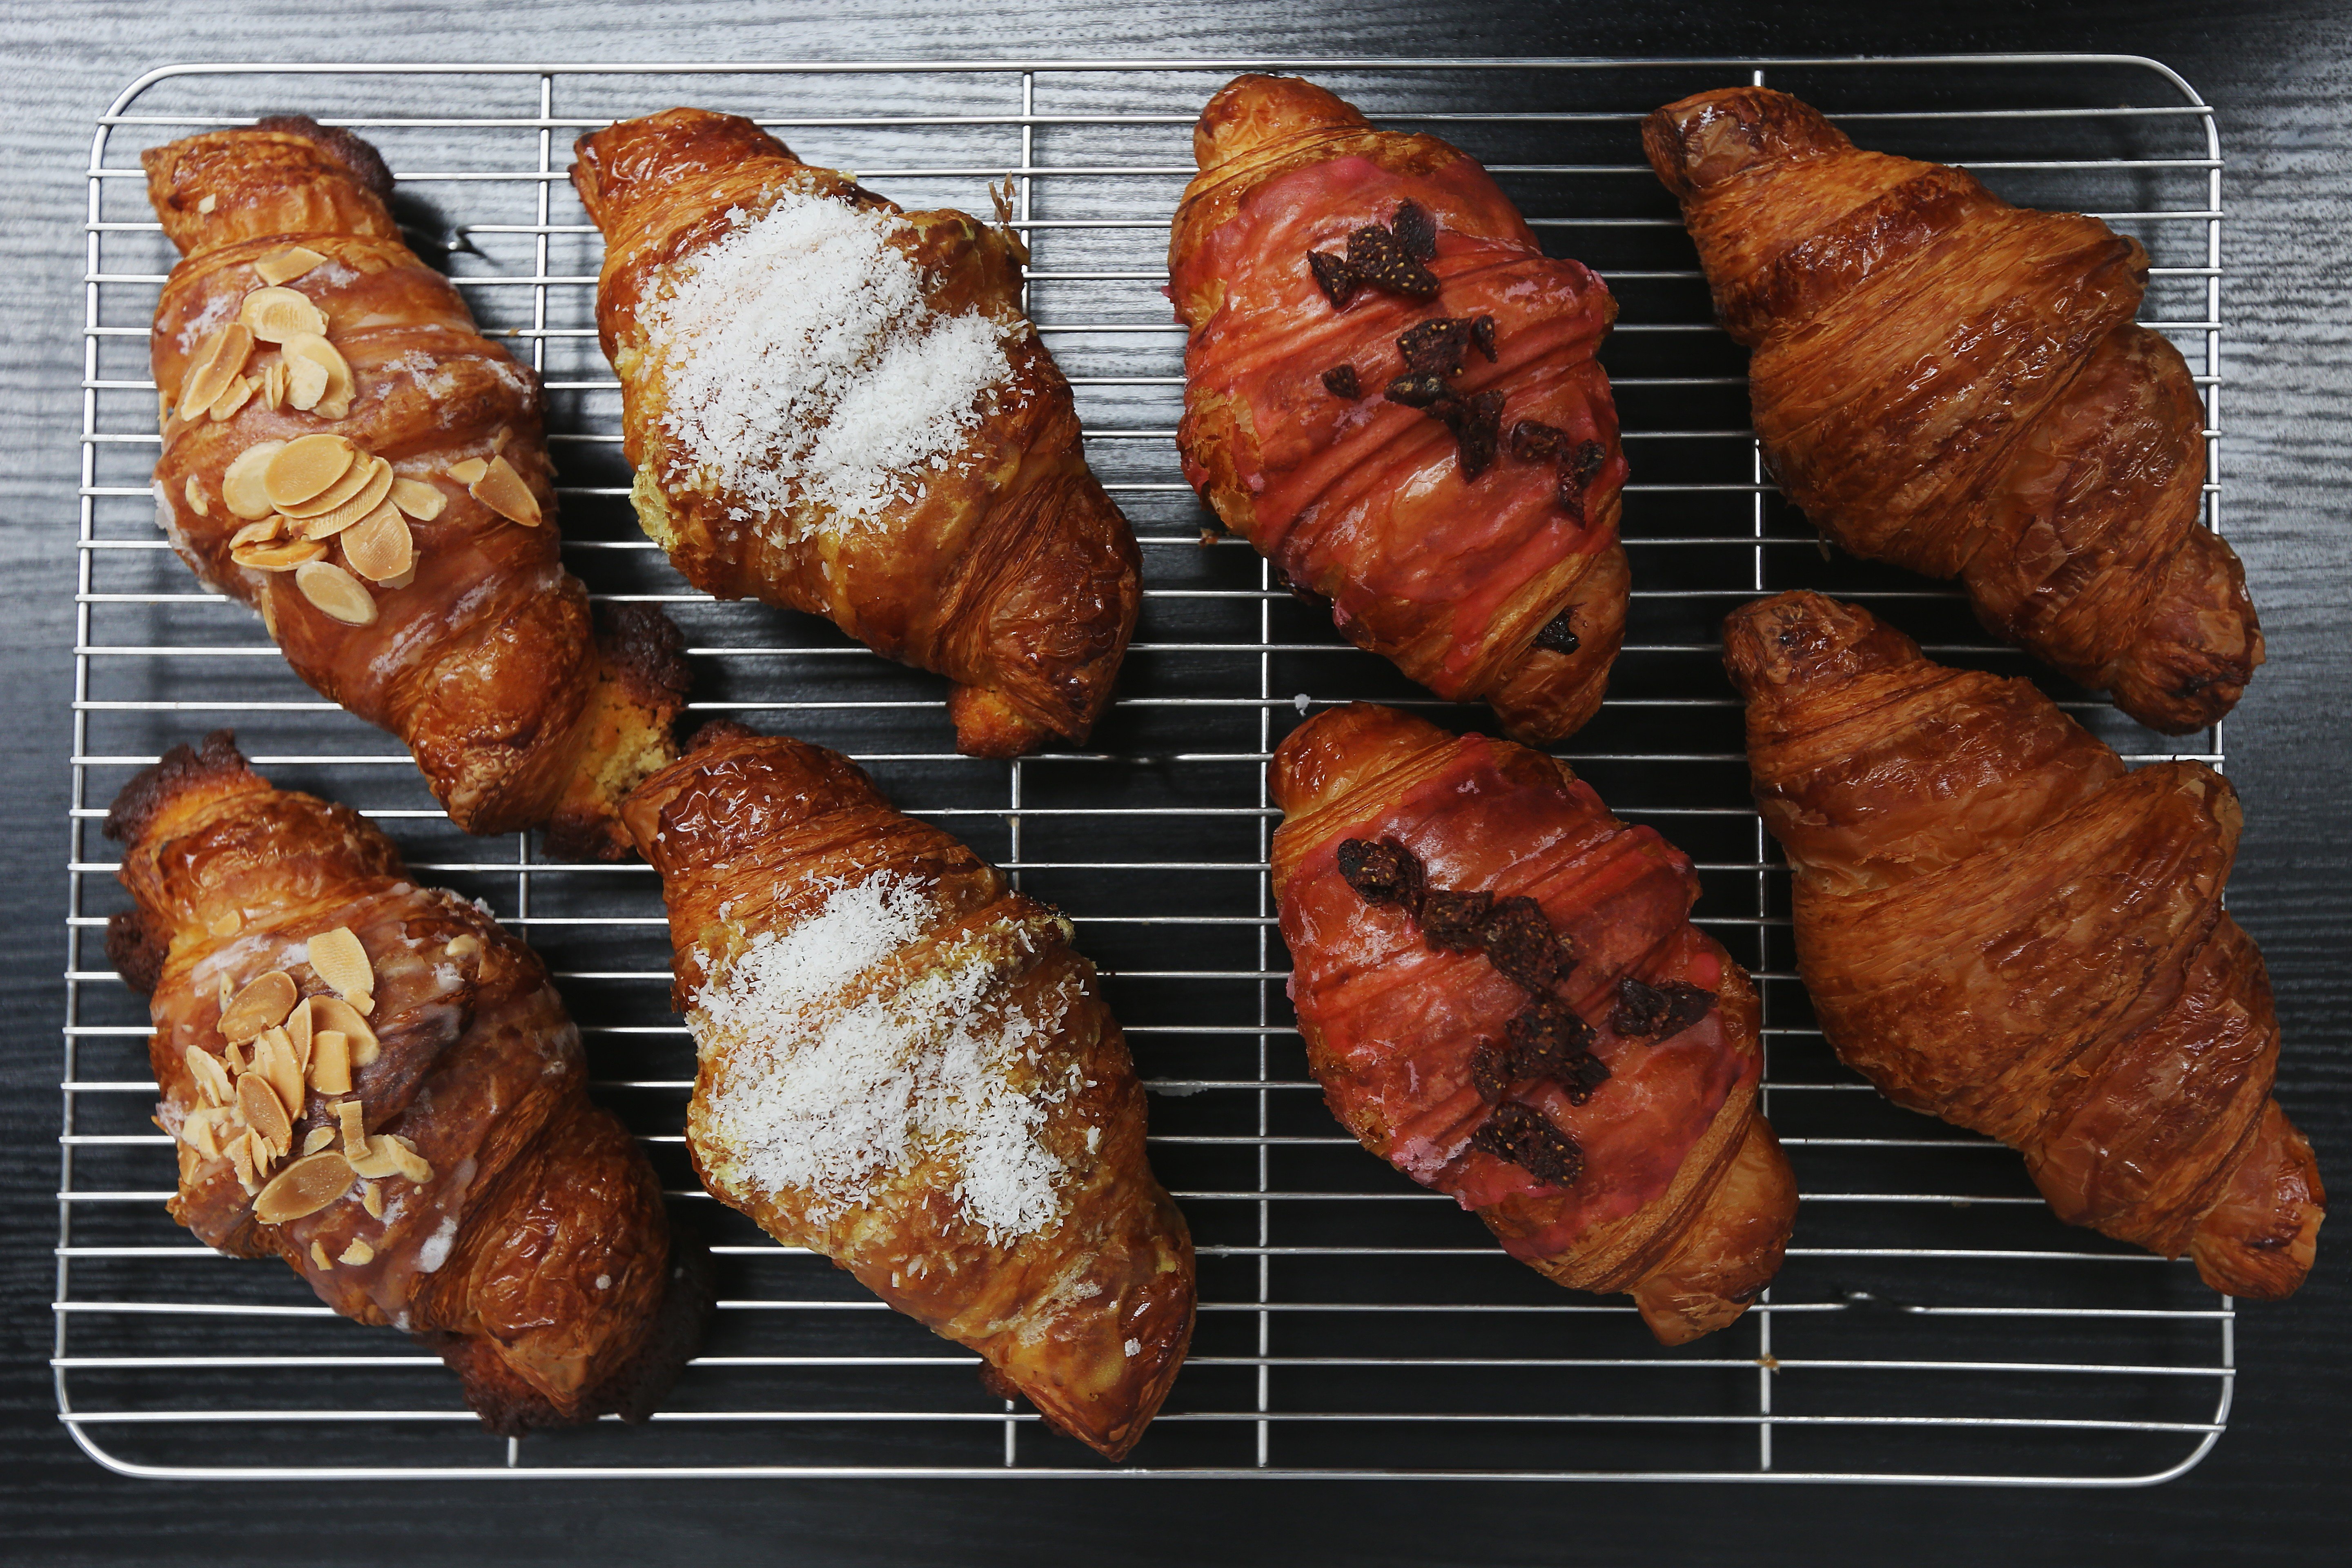 Croissants are the most popular pastry product at Plumcot in Tai Hung. This picture shows (from left) almond croissants, mango and coconut croissants, strawberry croissants, and regular croissants. Photo: Xiaomei Chen